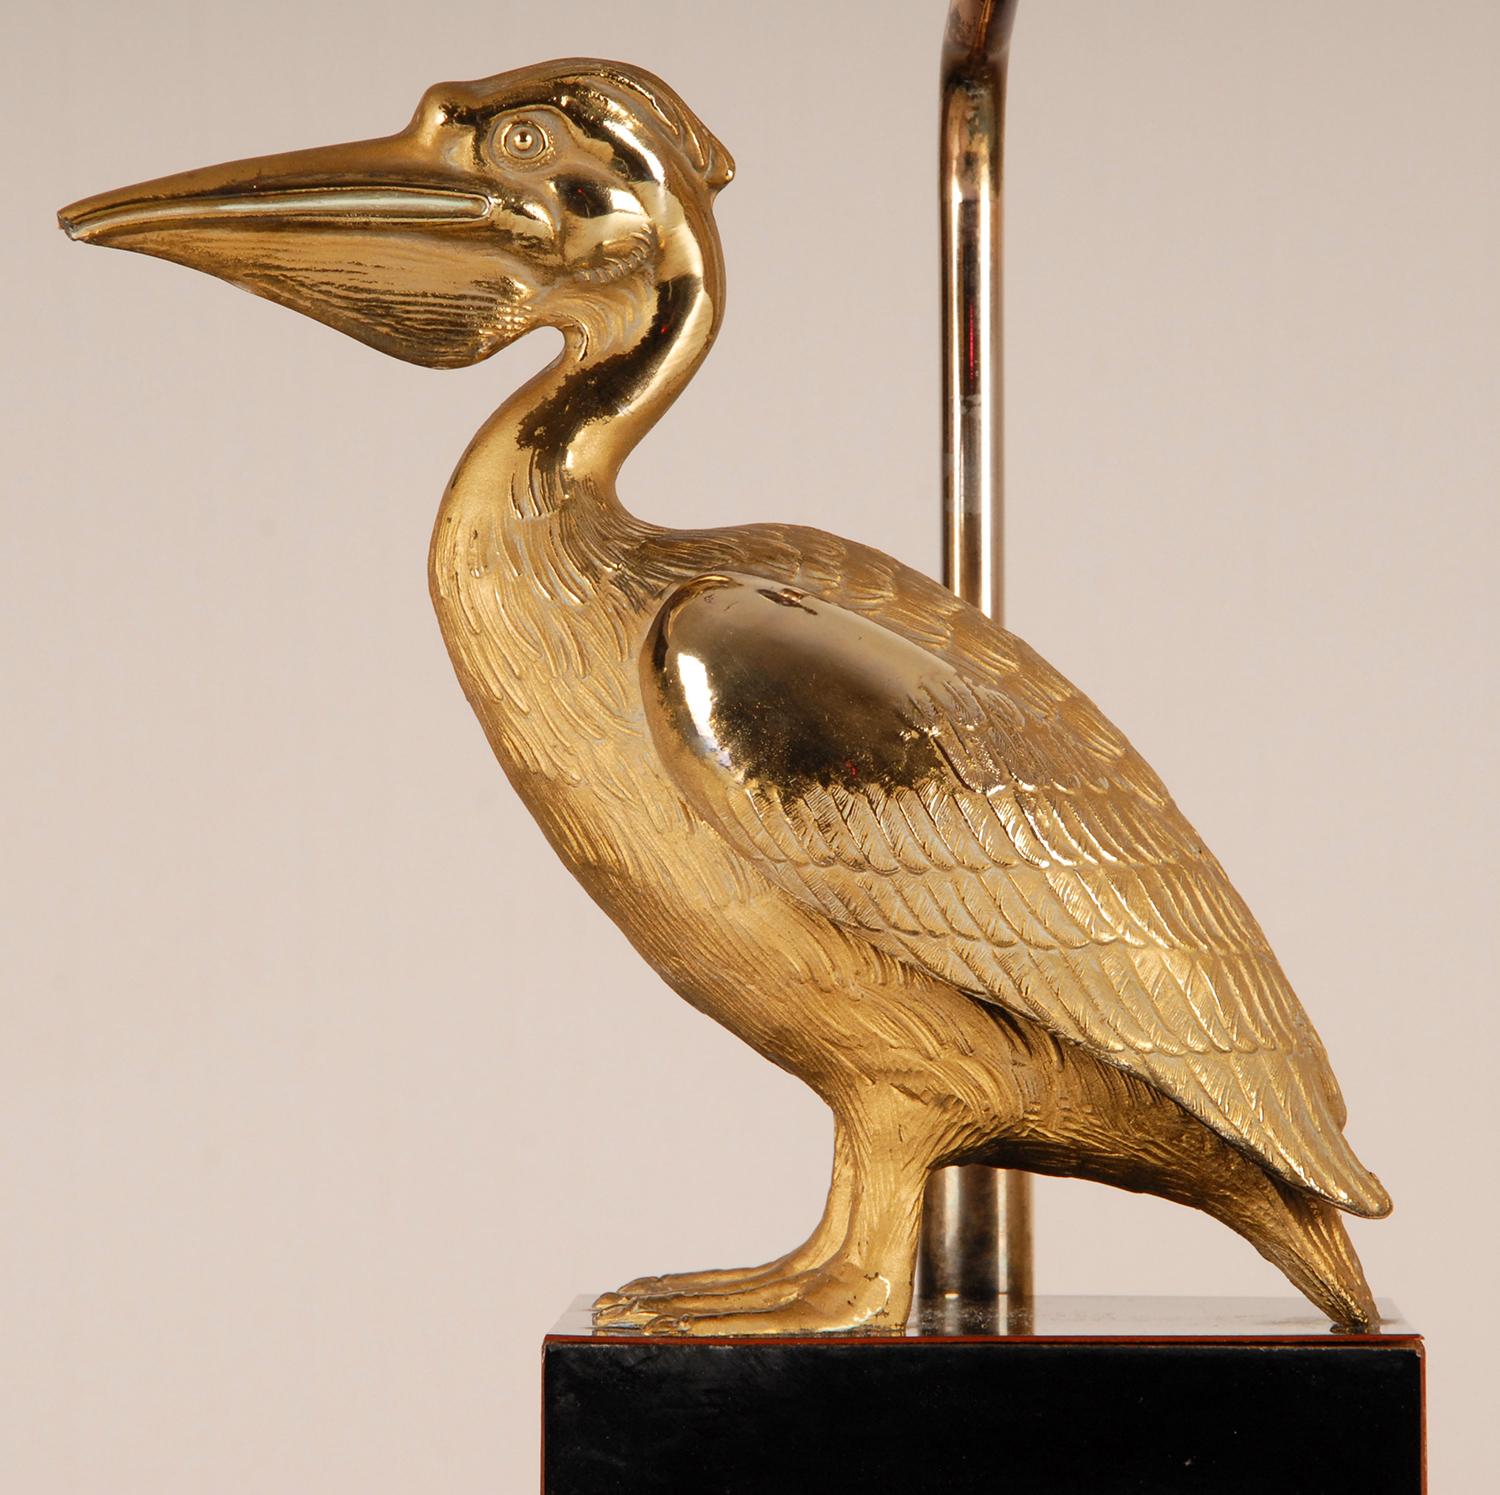 Maison Charles style table lamp
Elegant figural table lamp 
Depicting a gilt brass Pelican Bird on a black stepped base.
The Beige / Champagne colored lampshade is made of silk trimmed with gold.
The lamp is black corded and contains a on - off